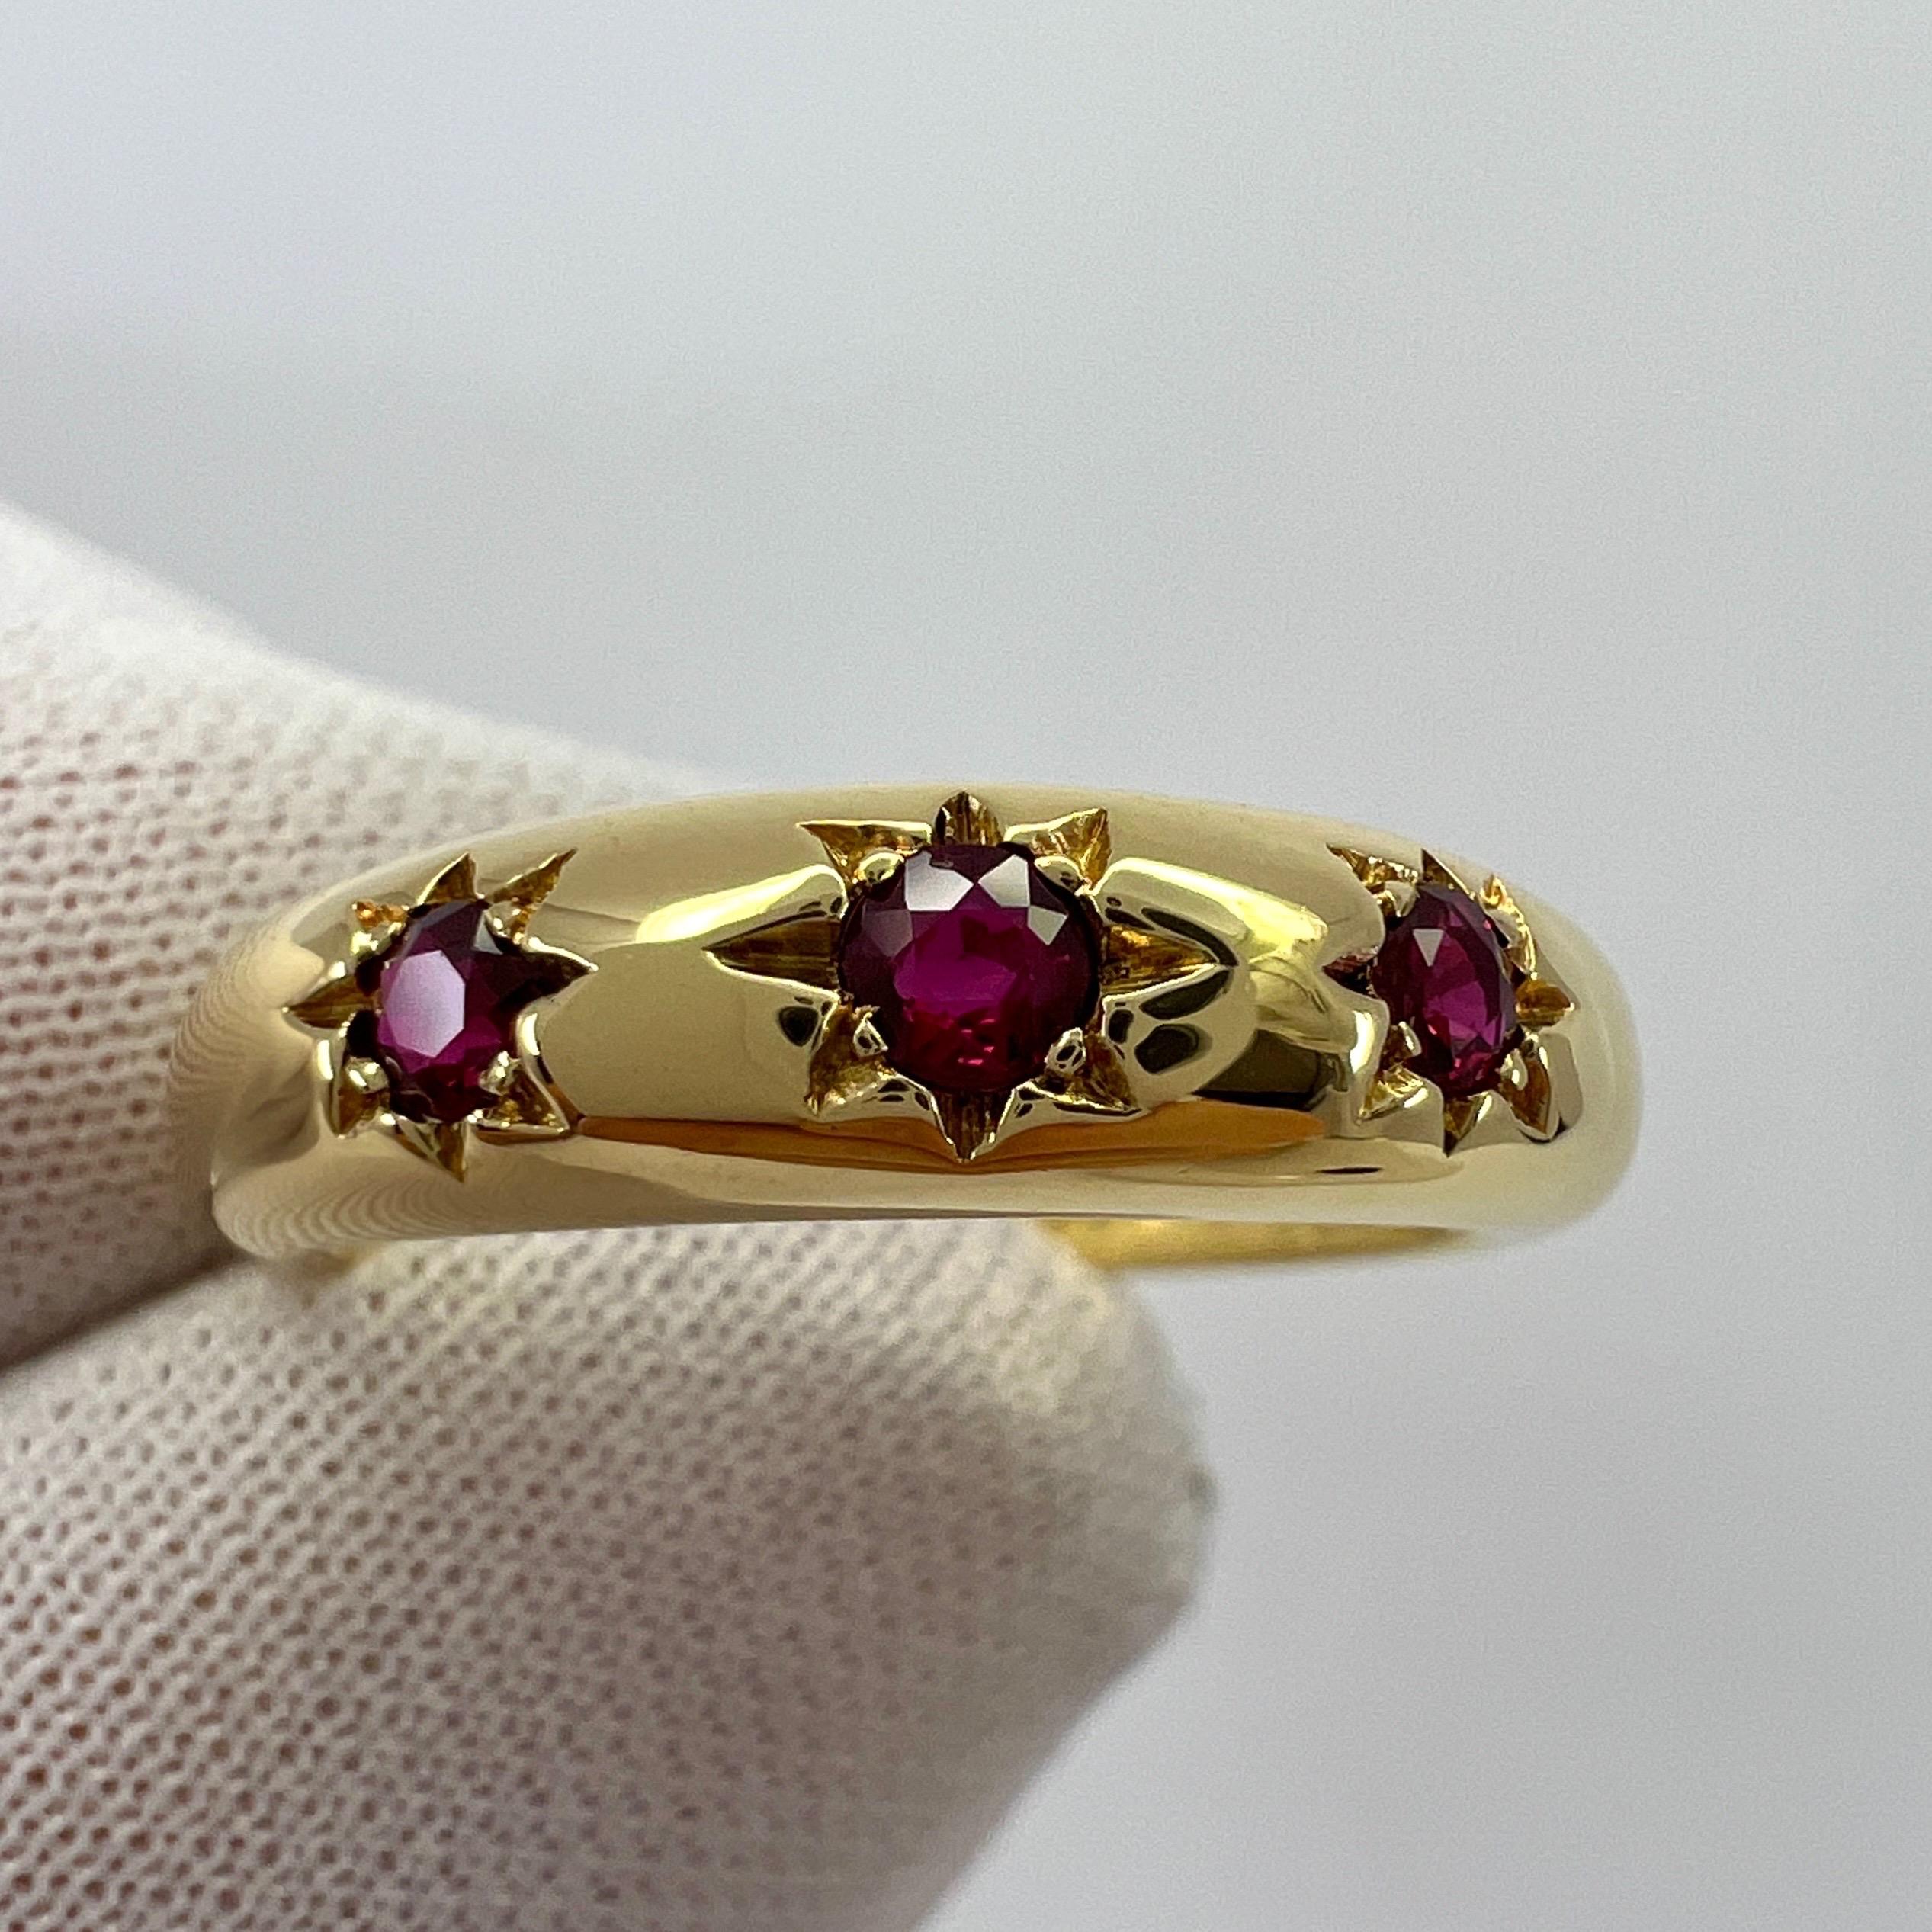 Vintage Van Cleef & Arpels Round Cut Star Set Ruby Three Stone Yellow Gold Ring.

A stunning vintage ring with a classic three stone design. Star with three fine red rubies. 
All have a vivid red colour and an excellent round cut. Perfectly matched.